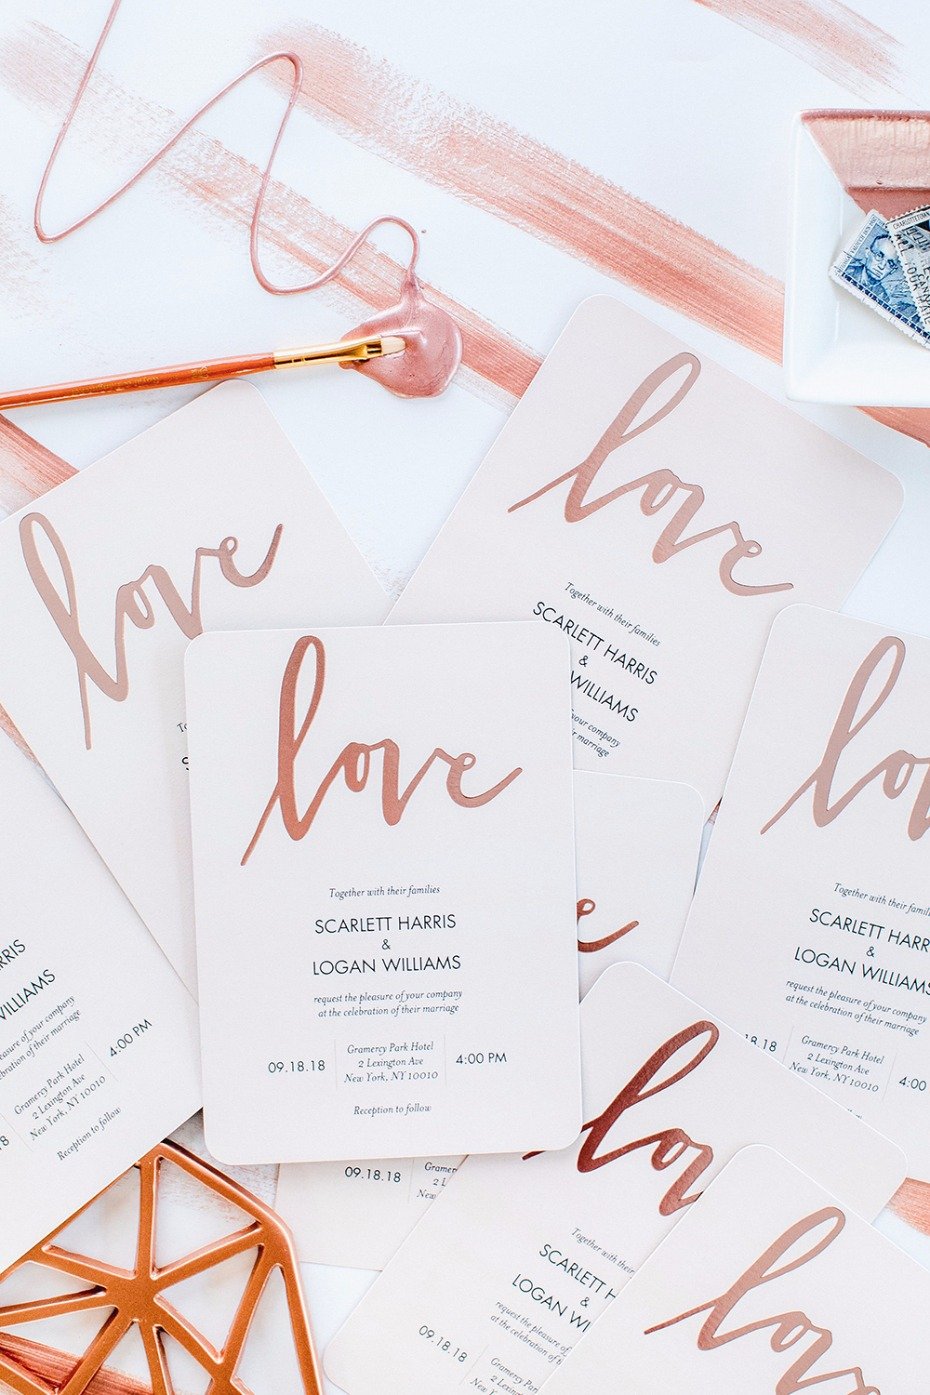 Rose gold wedding invites from Shutterfly